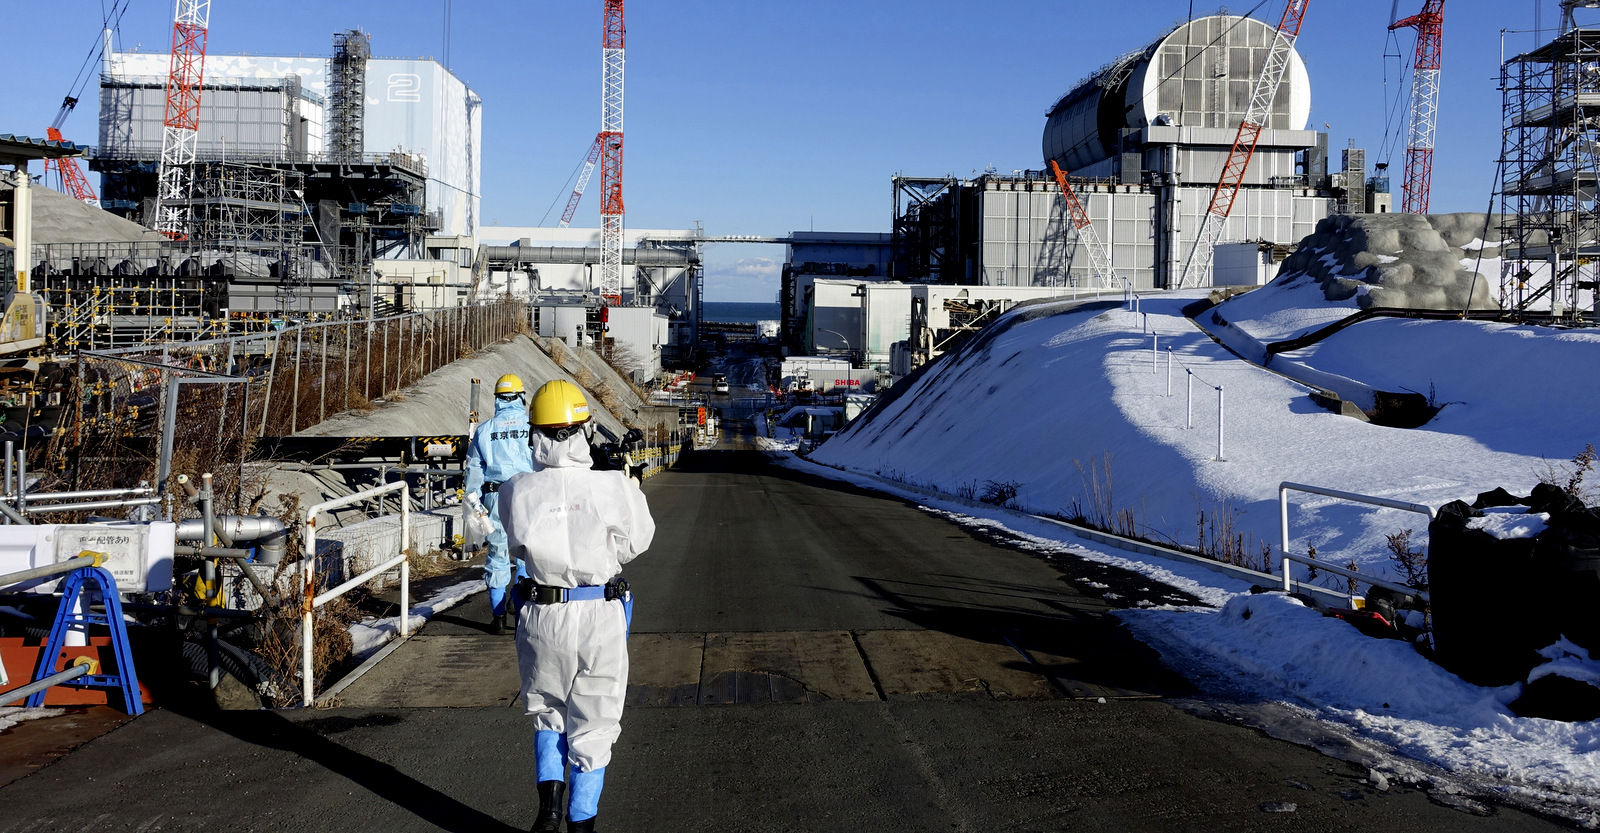 A dome-shaped rooftop covers key equipment at Unit 3 reactor of the Fukushima Dai-ichi nuclear power plant ahead of a fuel removal from its storage pool in Okuma, Fukushima Prefecture, northeast Japan, Jan. 25, 2018. (AP/Mari Yamaguchi)